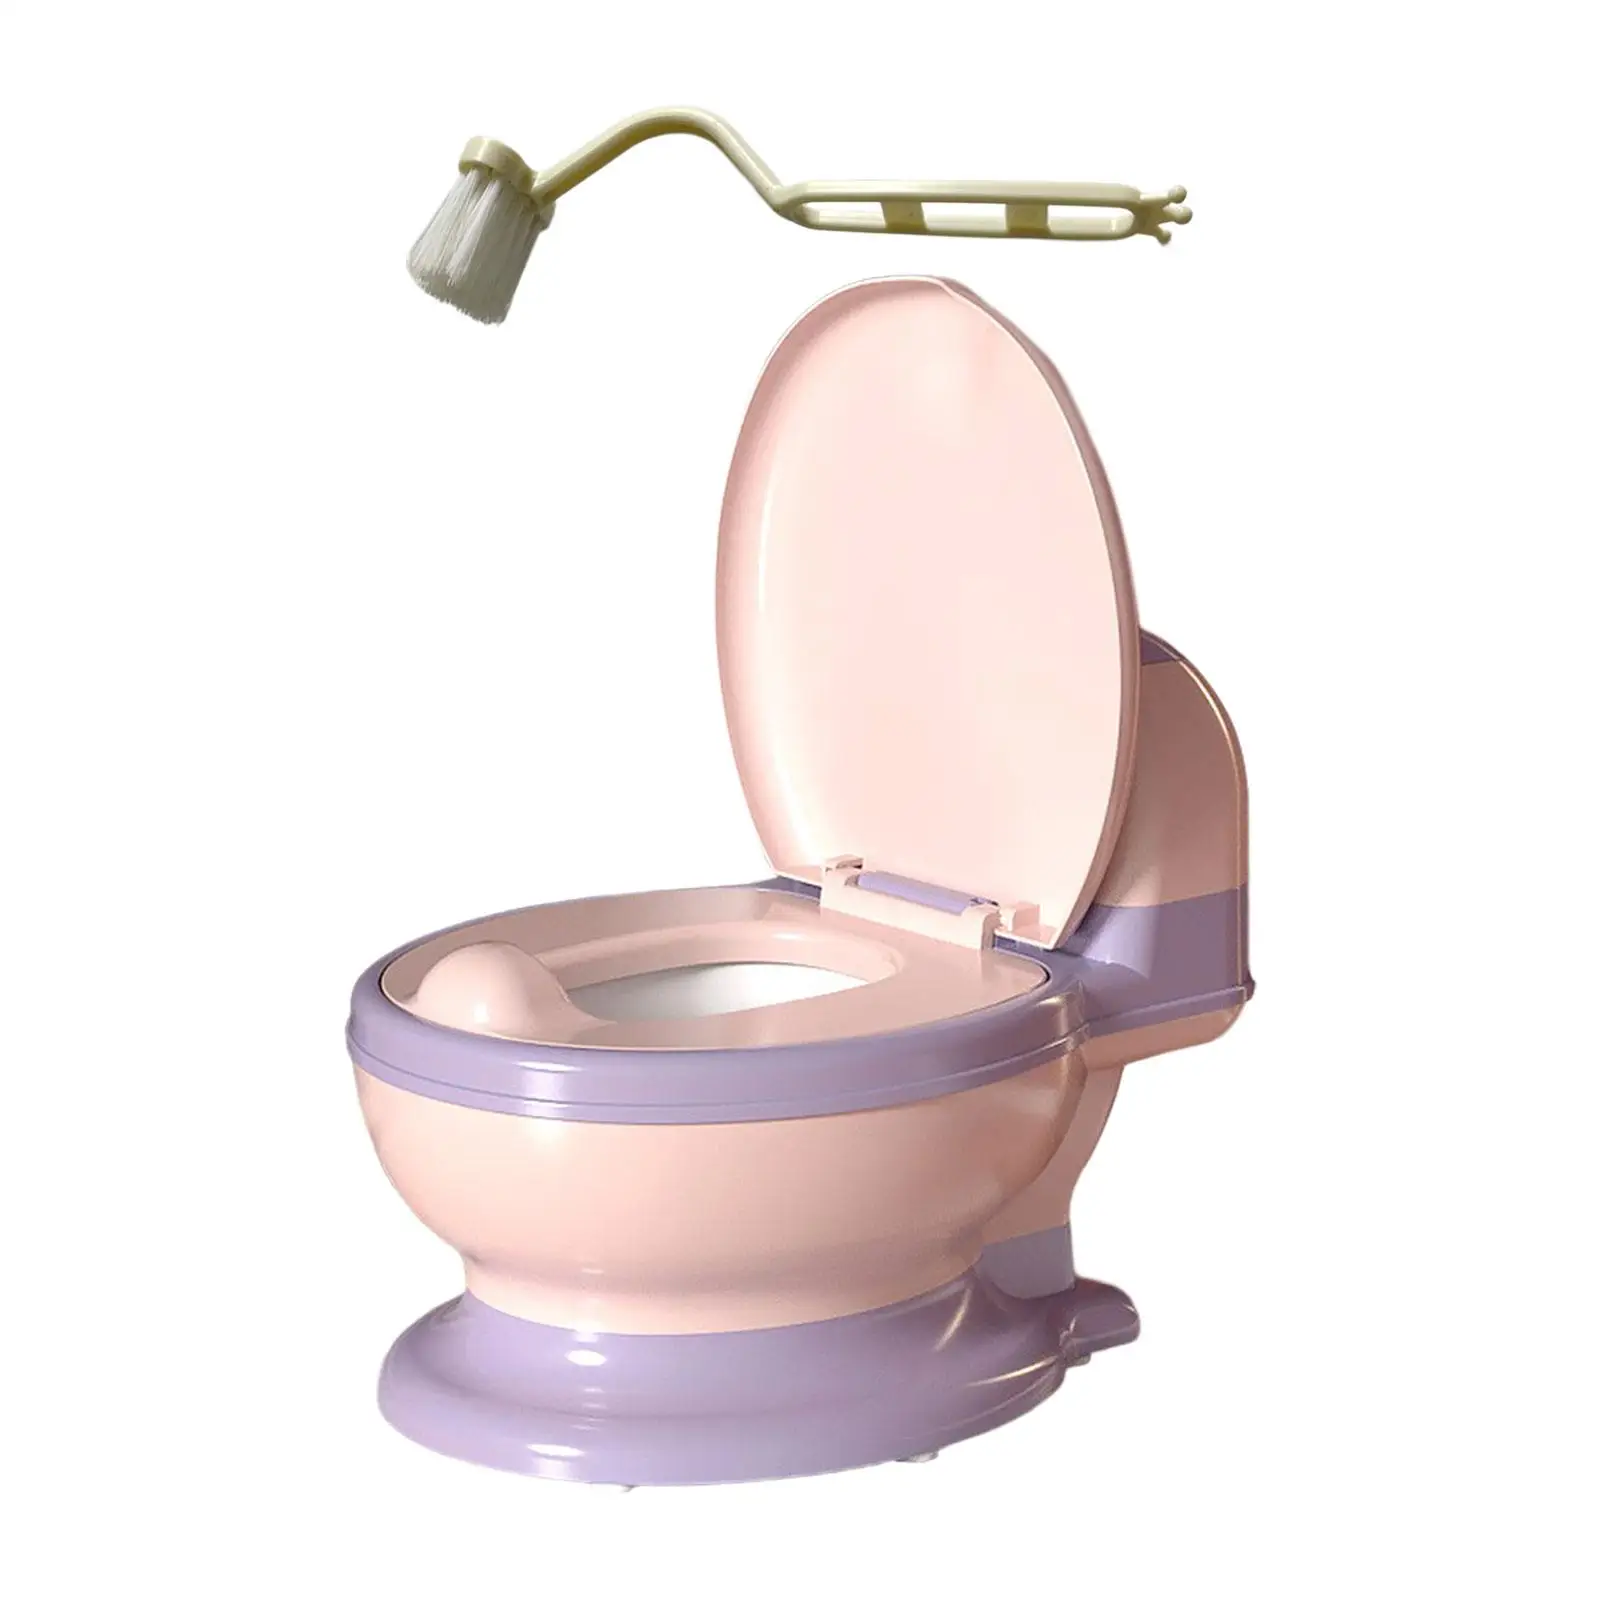 Baby Potty Toilet Includes Cleaning Brush Realistic Toilet Kids